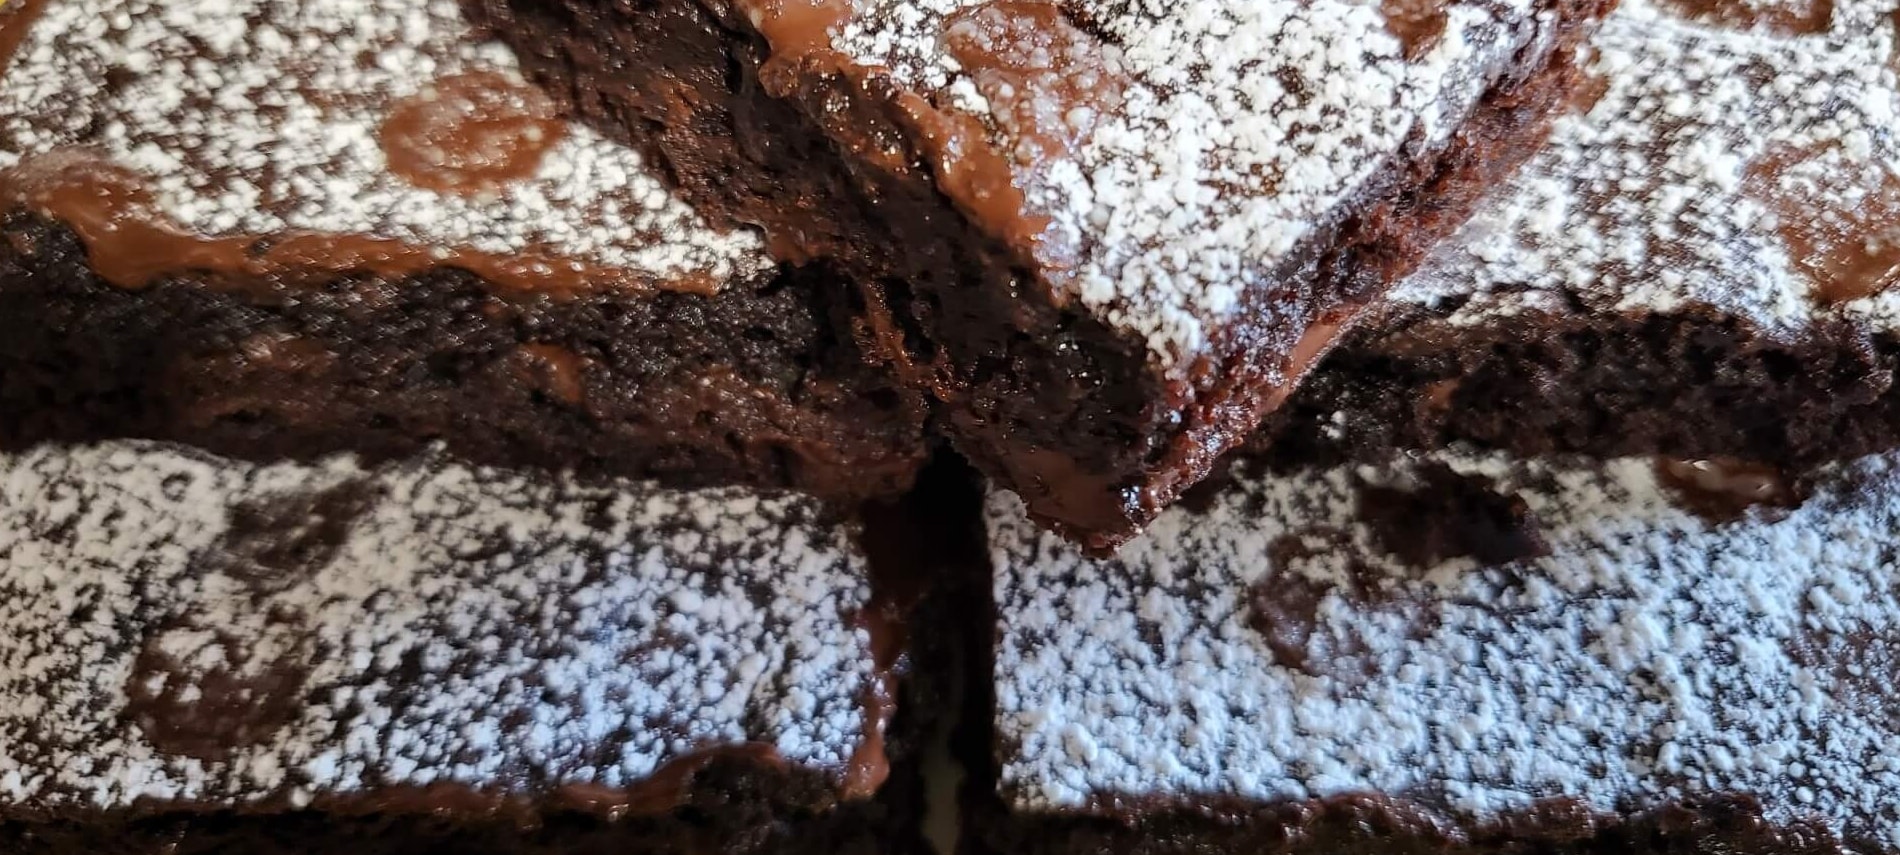 Stack of dark chocolate brownies with chocolate chips, sprinkled with powdered sugar.